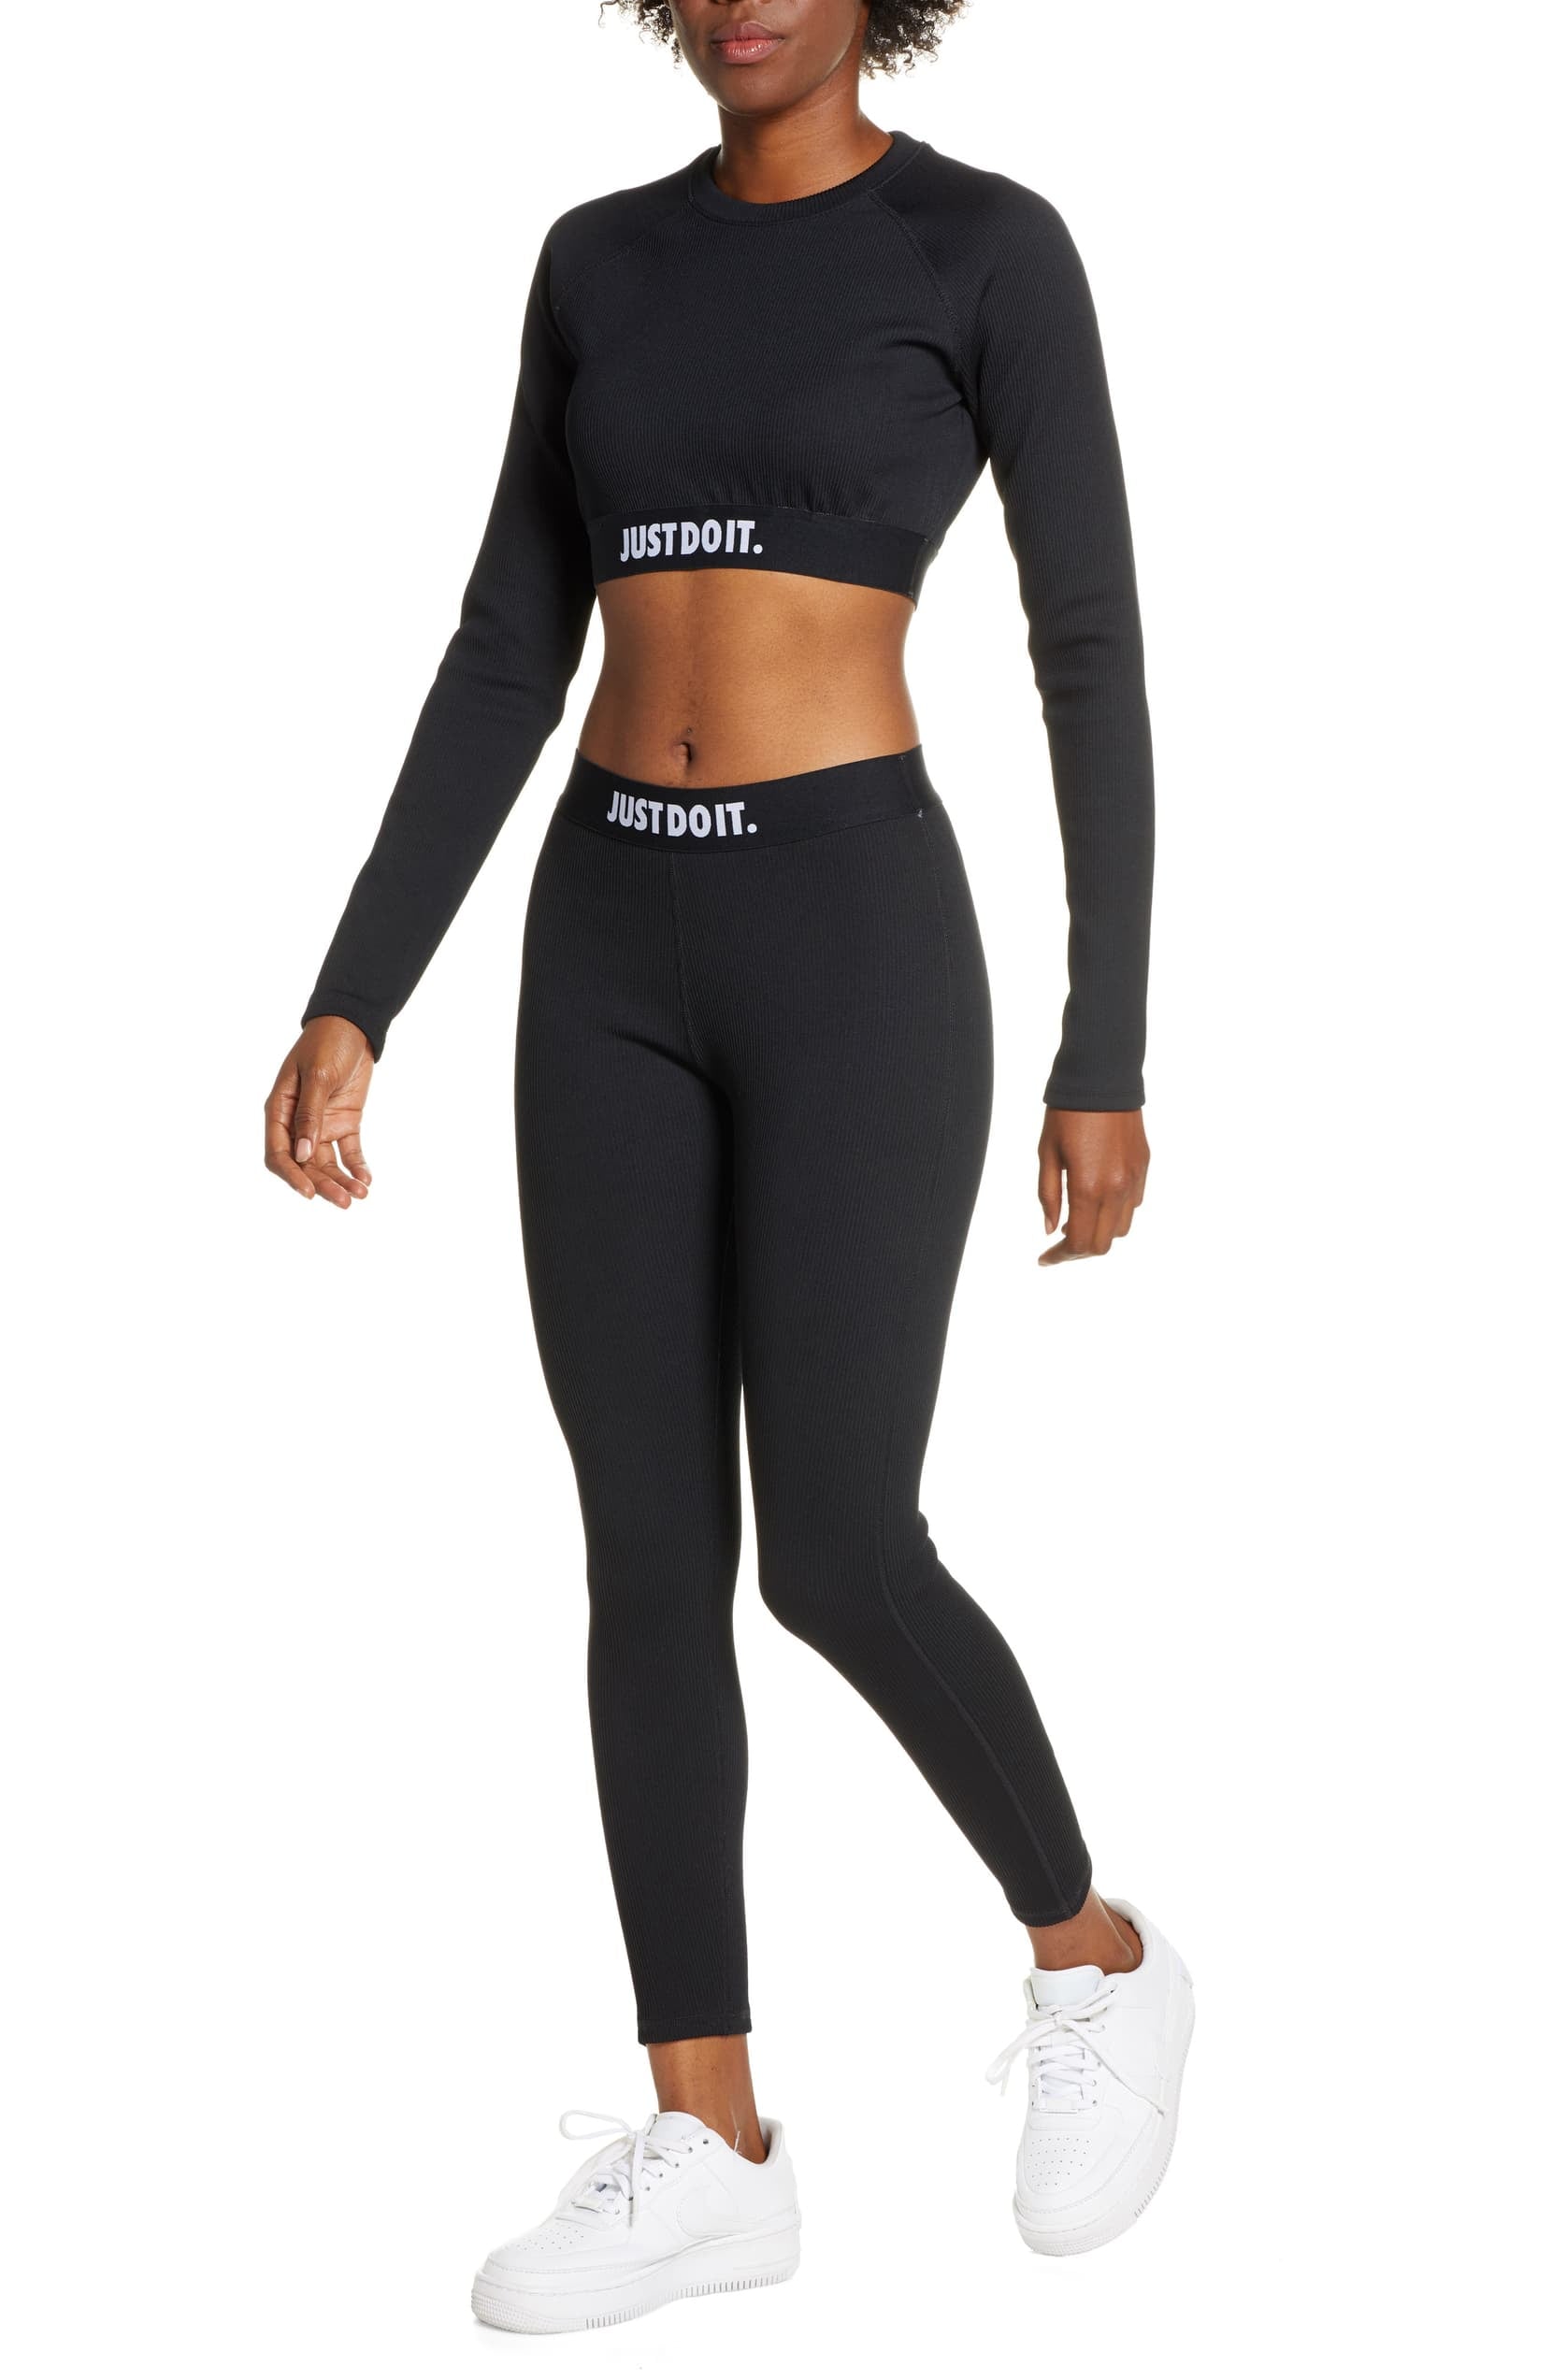 Nike JDI Rib Crop Top and Ribbed JDI Leggings, These 10 Matching Workout  Sets Are the Prettiest Gifts For Any Fashionable Fitness Fan